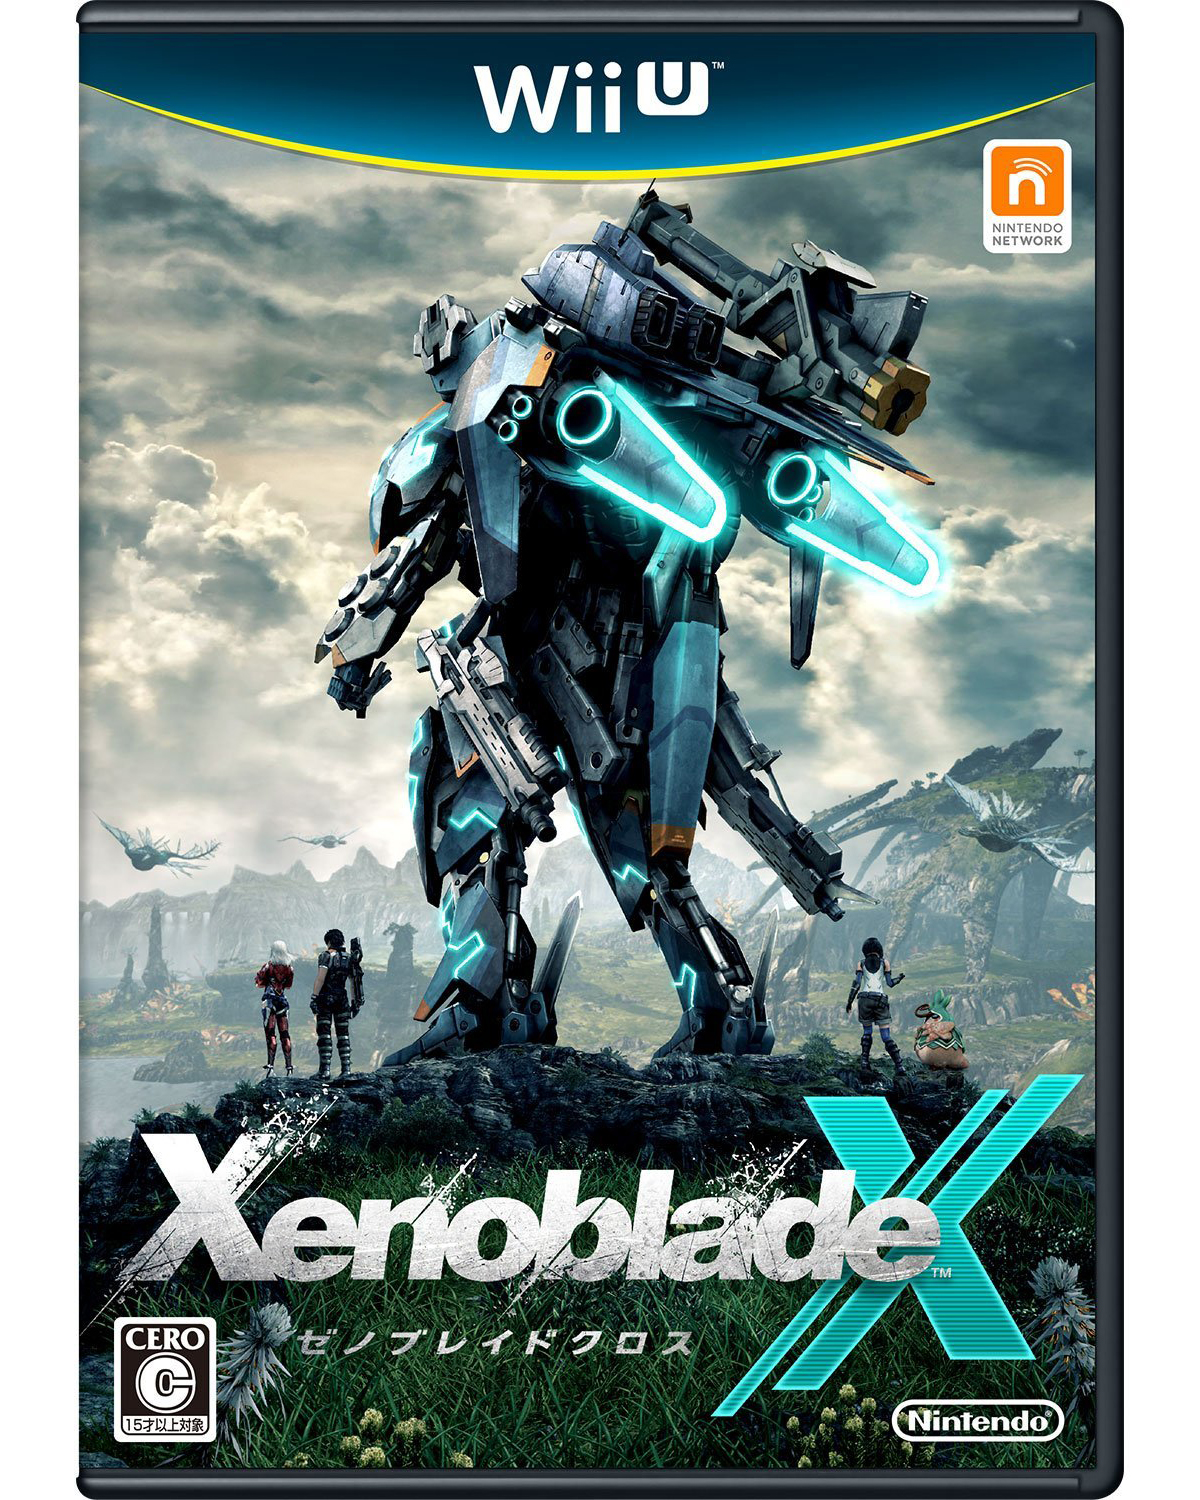 This Is The Japanese Boxart For Wii U Exclusive Xenoblade Chronicles X ...